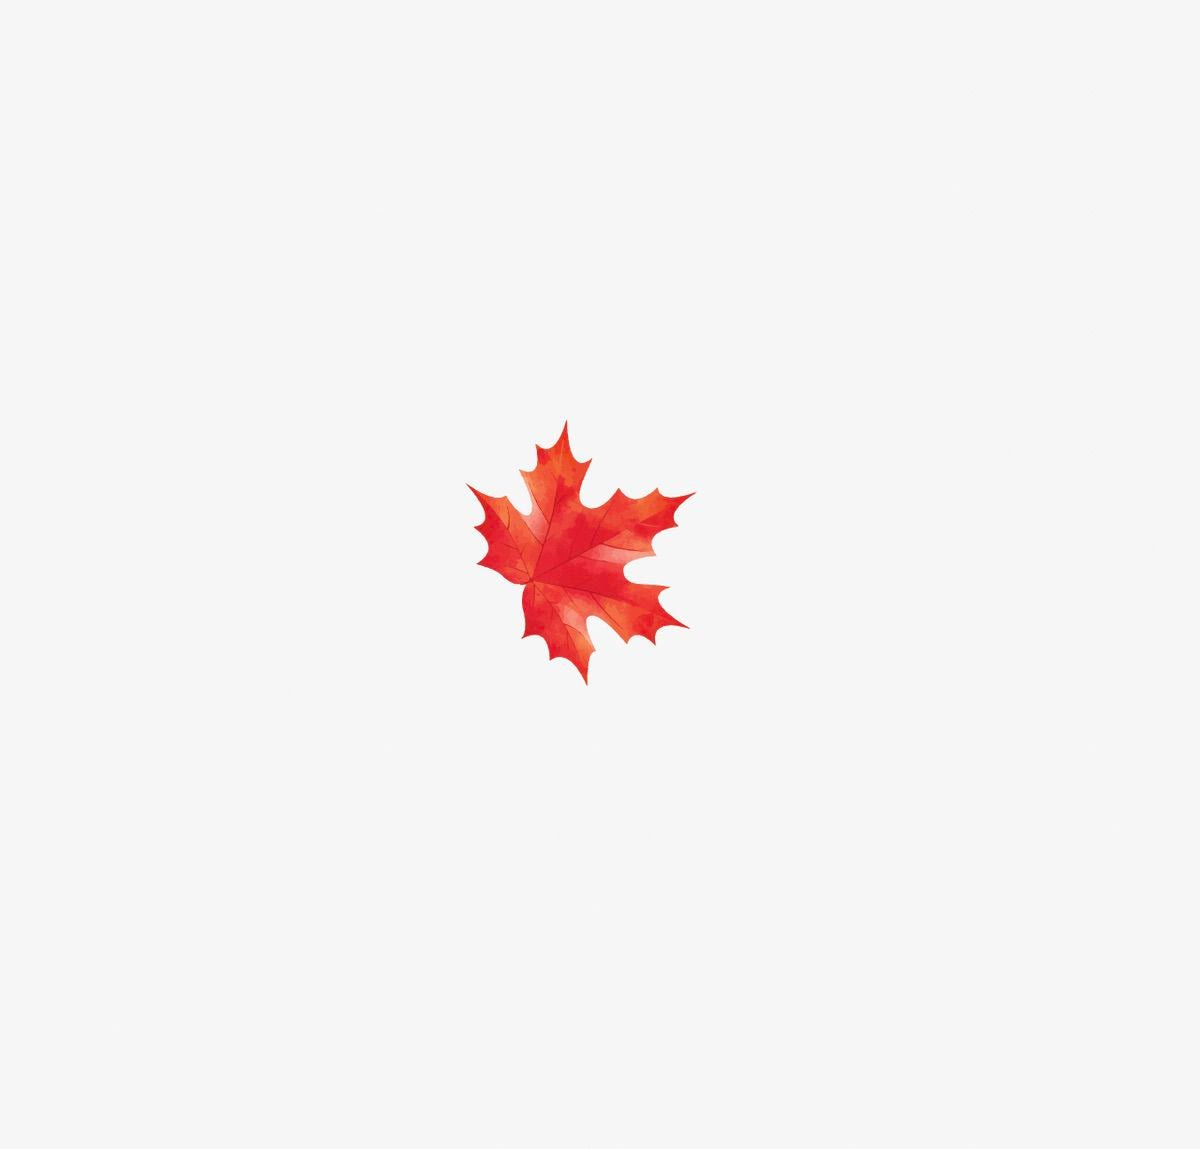 A single red maple leaf centered on a plain white background, symbolizing Cover-Alls Thanksgiving Cornucopia Decals decorations.